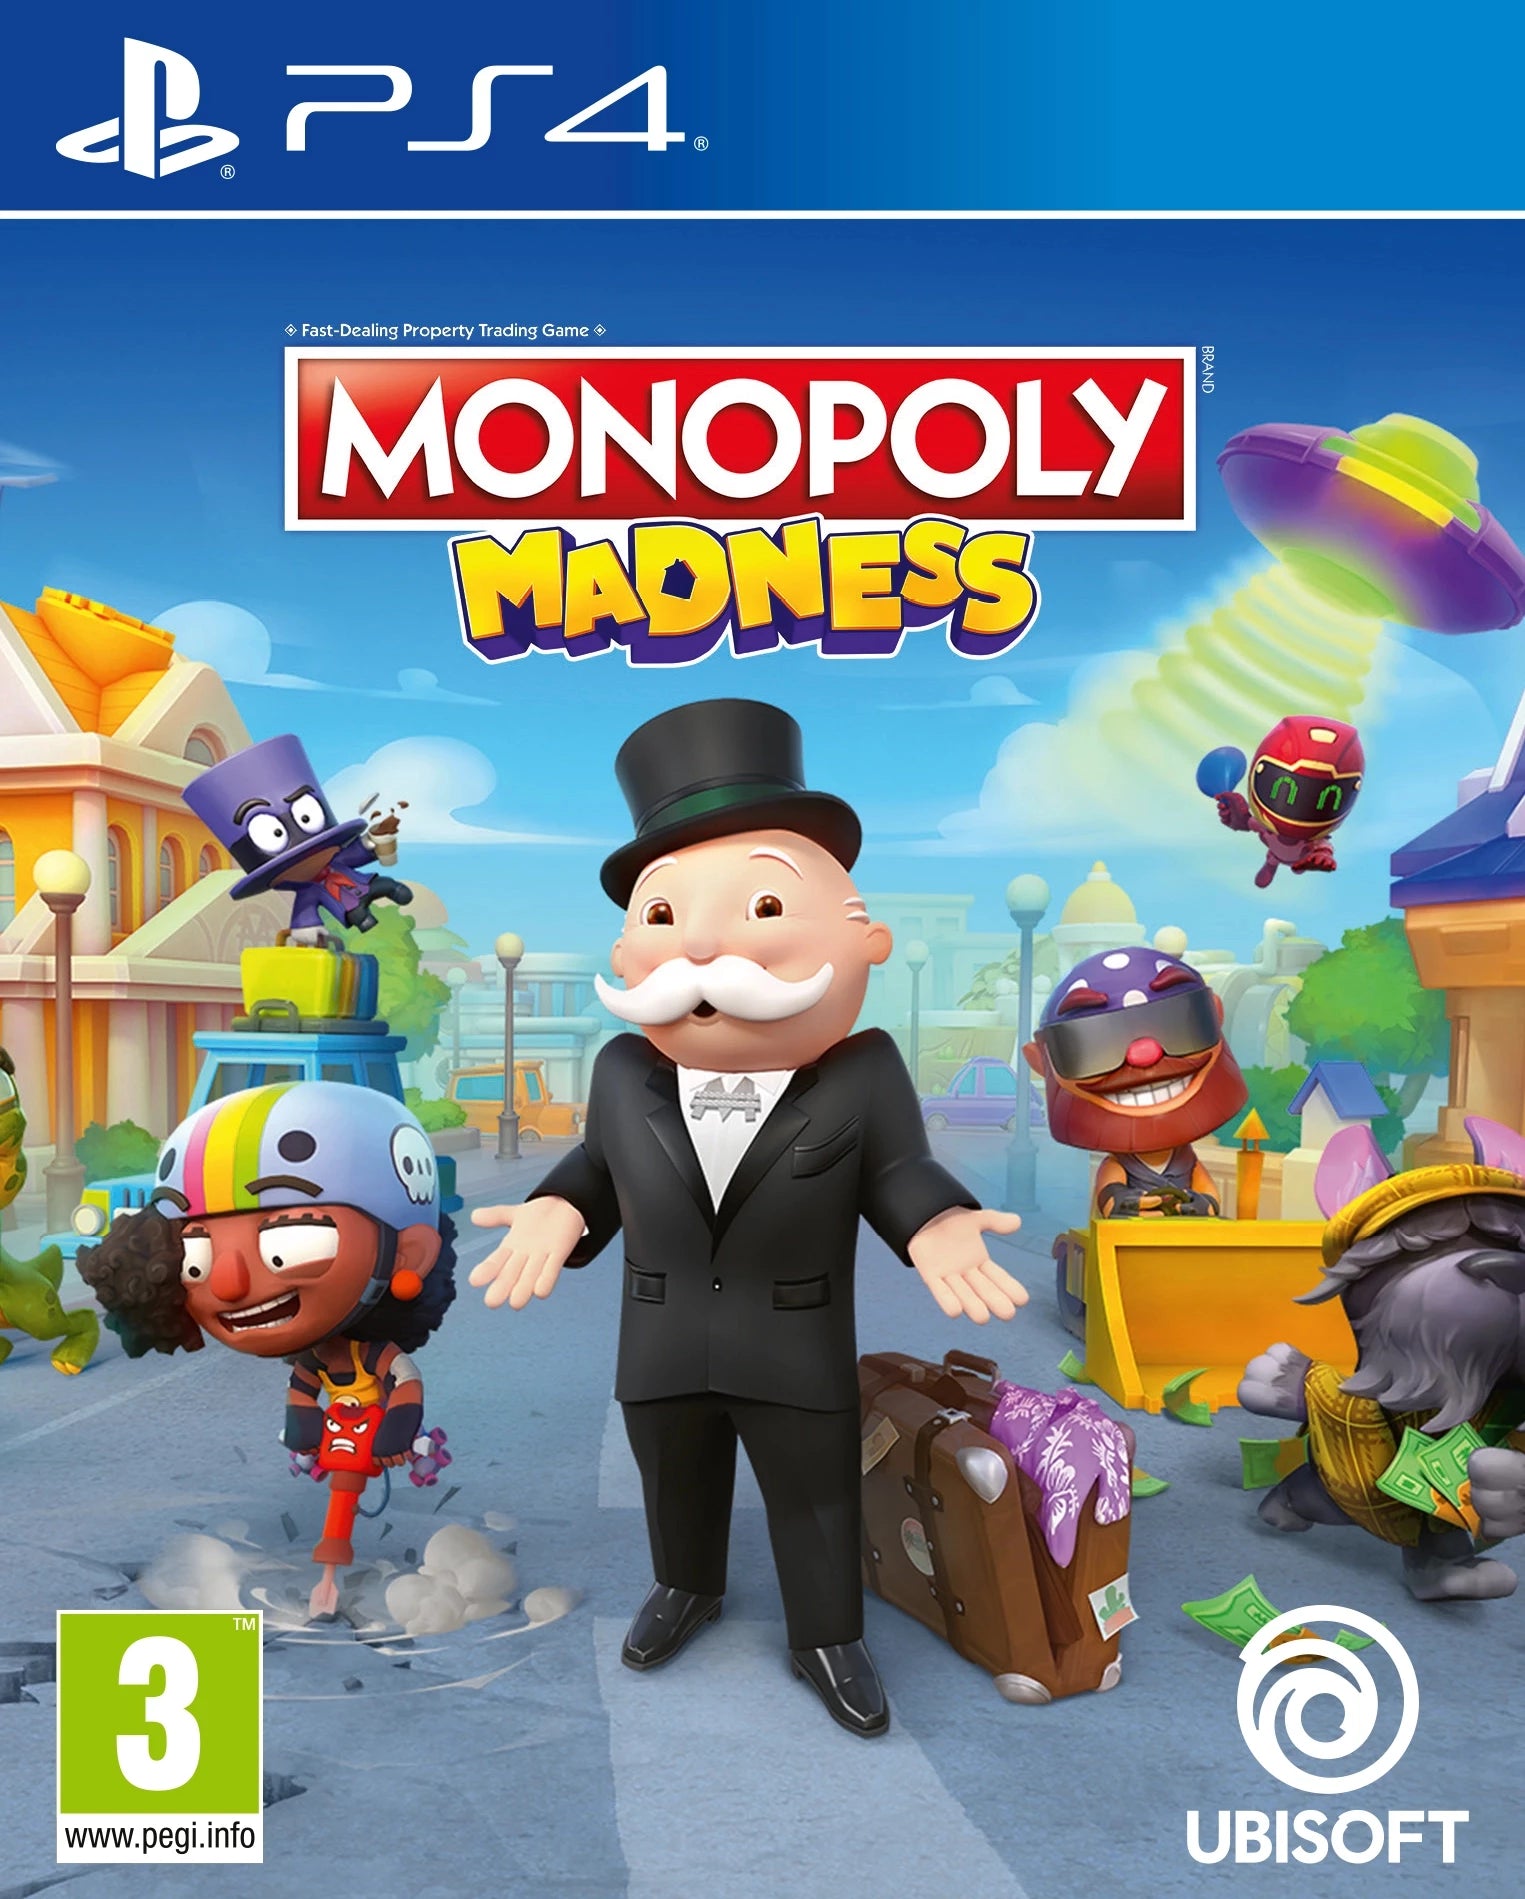 Monopoly Madness Gamesellers.nl